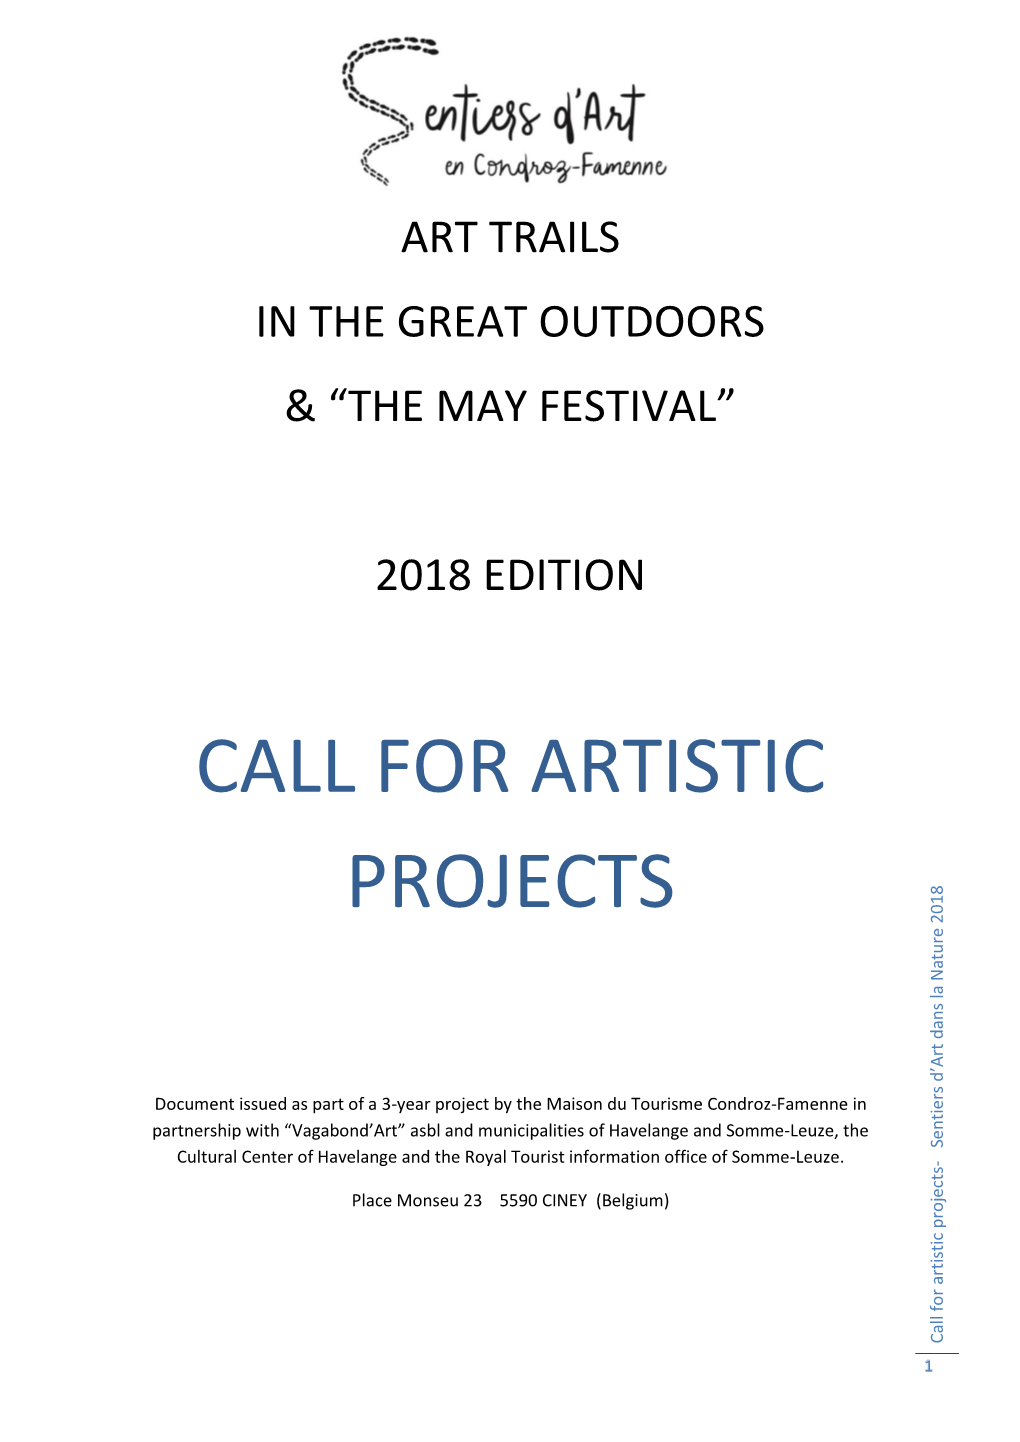 Call for Artistic Projects for Call Artistic